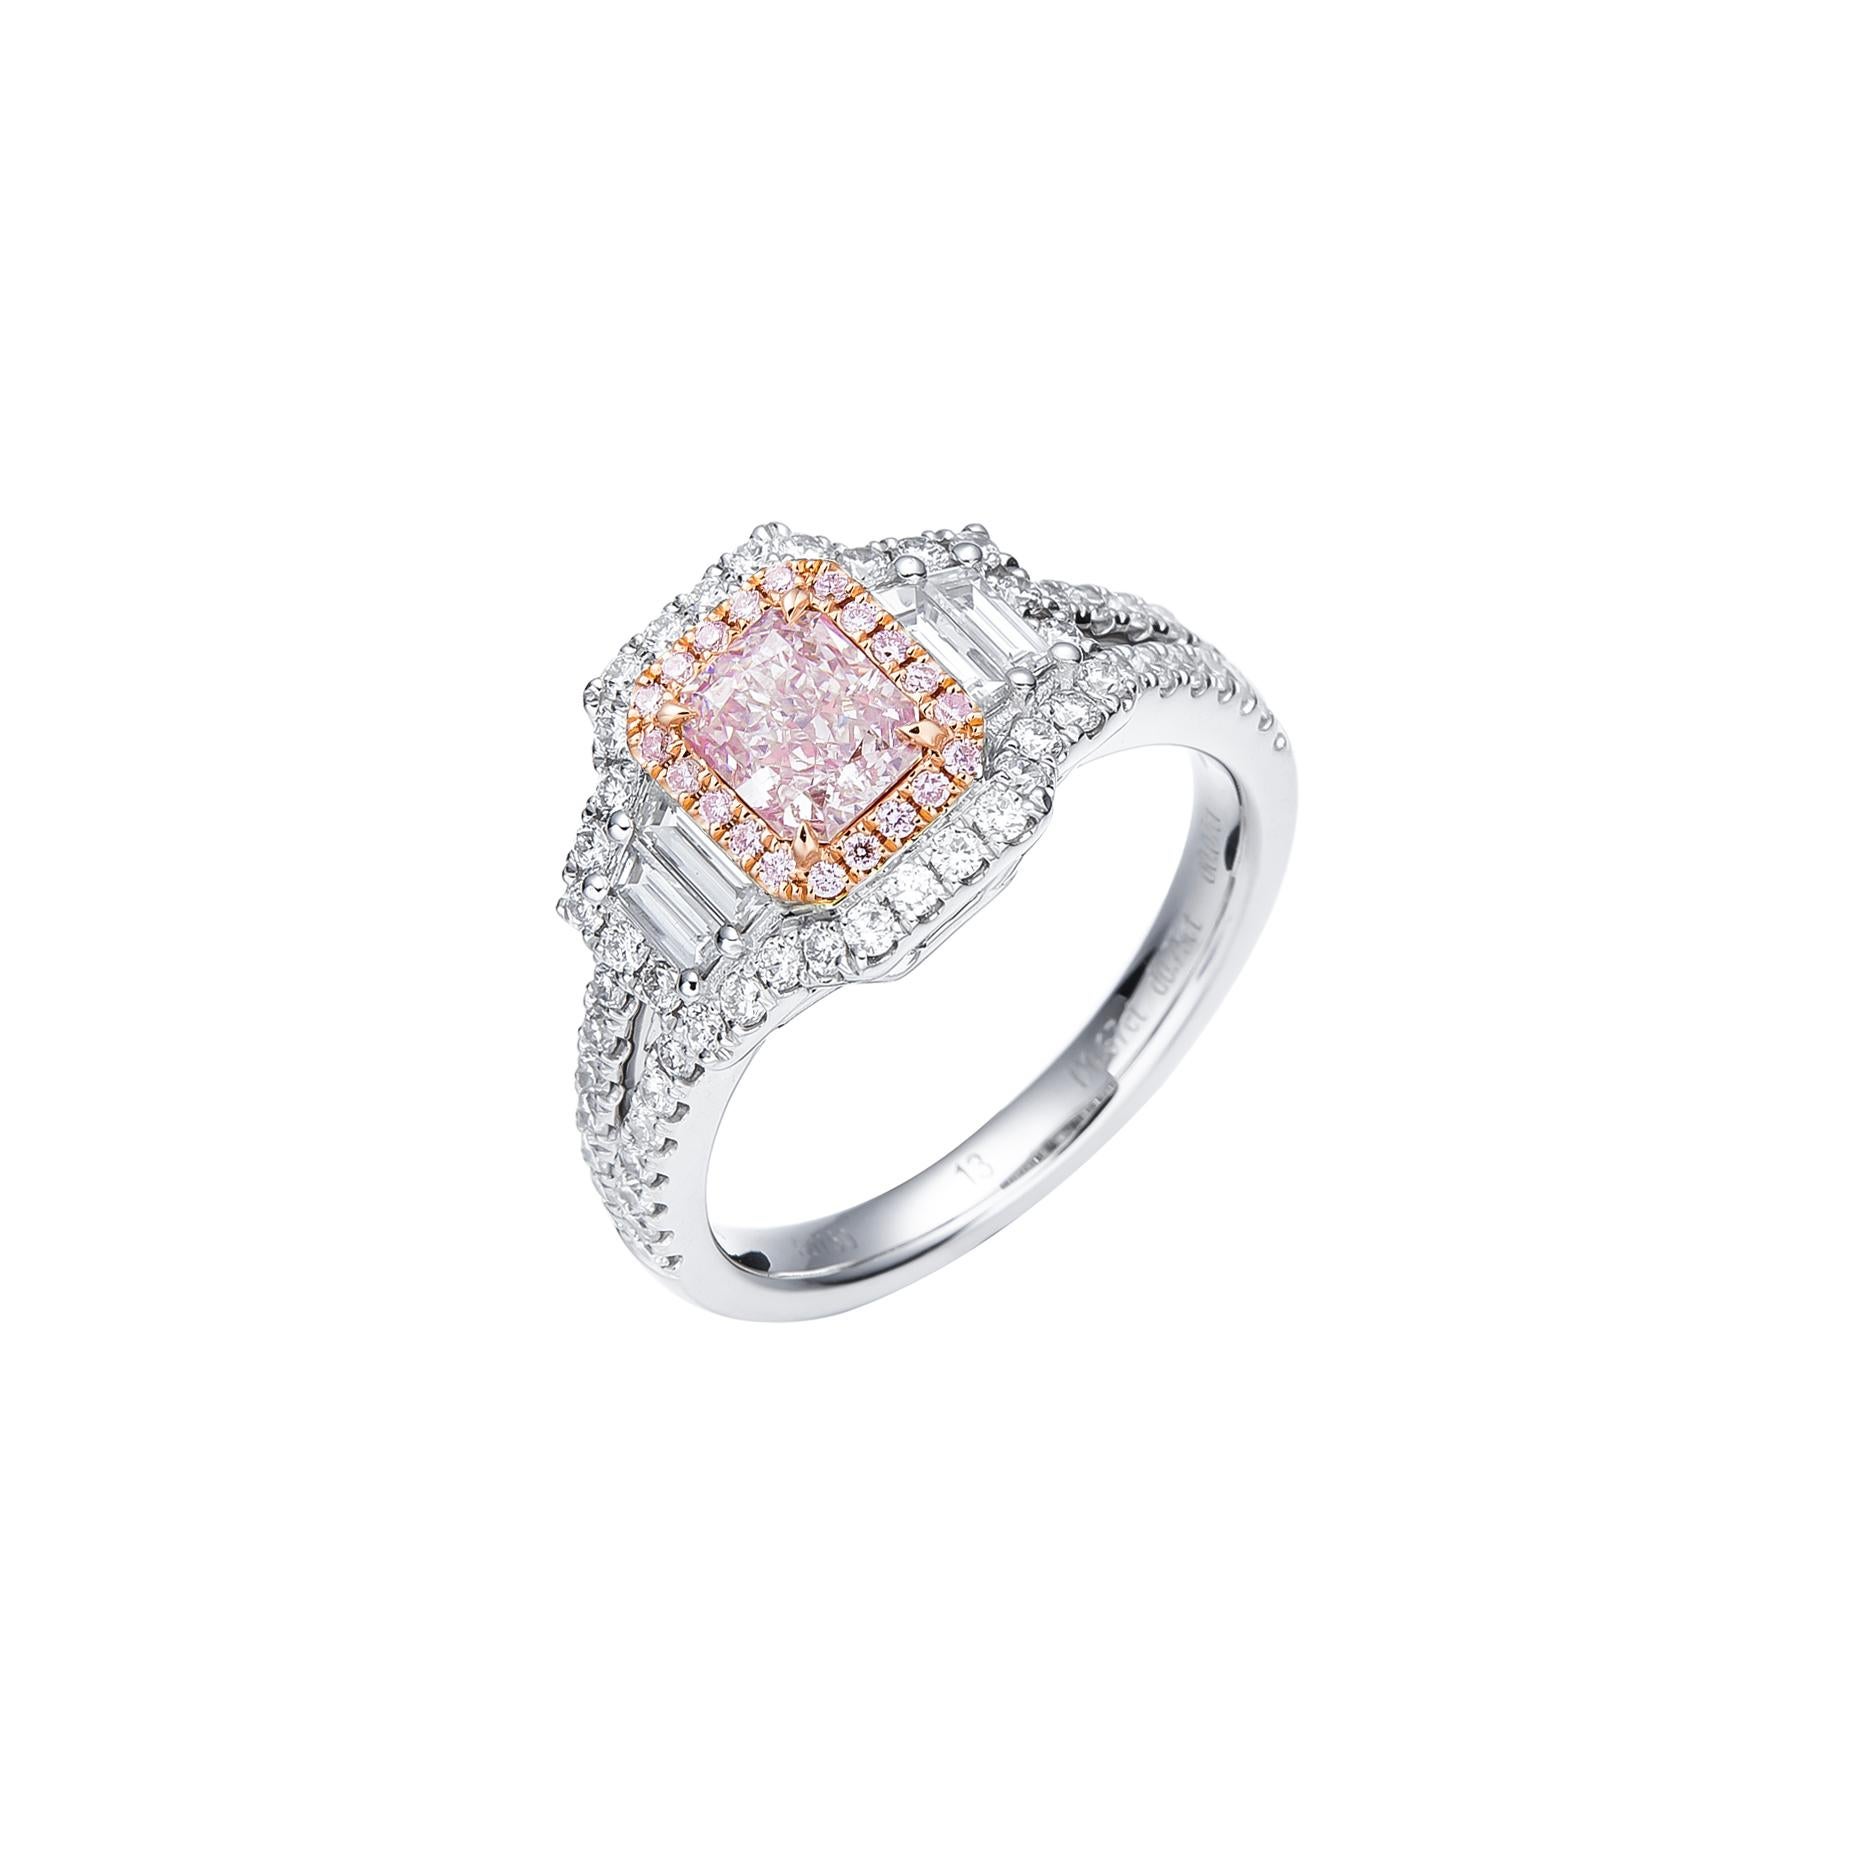 Unveil Uniqueness and Beauty: Introducing the Enchanting GIA Certified 0.67ct Light Pinkish Brown Natural Cushion Cut Diamond Solitaire Ring, a true masterpiece that captures the heart with its rare allure. Crafted with precision and set in